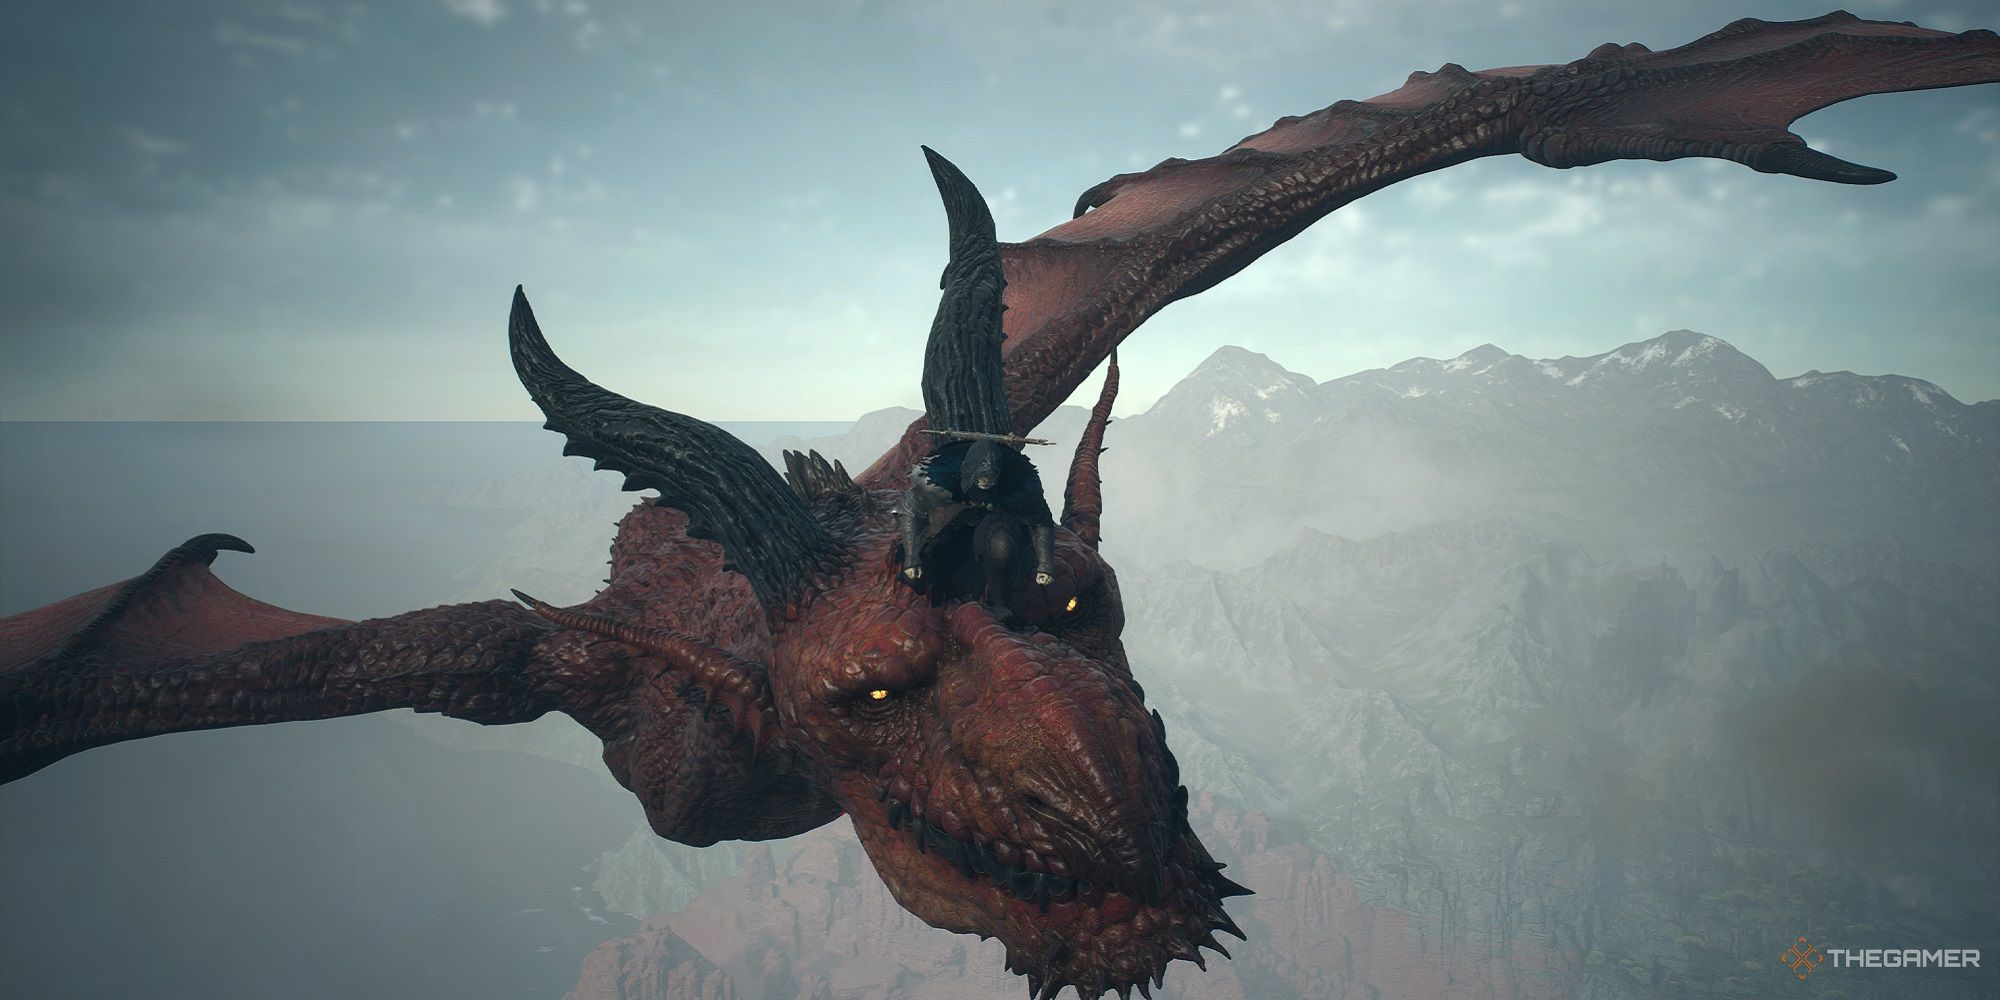 The Magic Of Dragons Dogma 2 Comes From Its Mechanics, Not Its Narrative